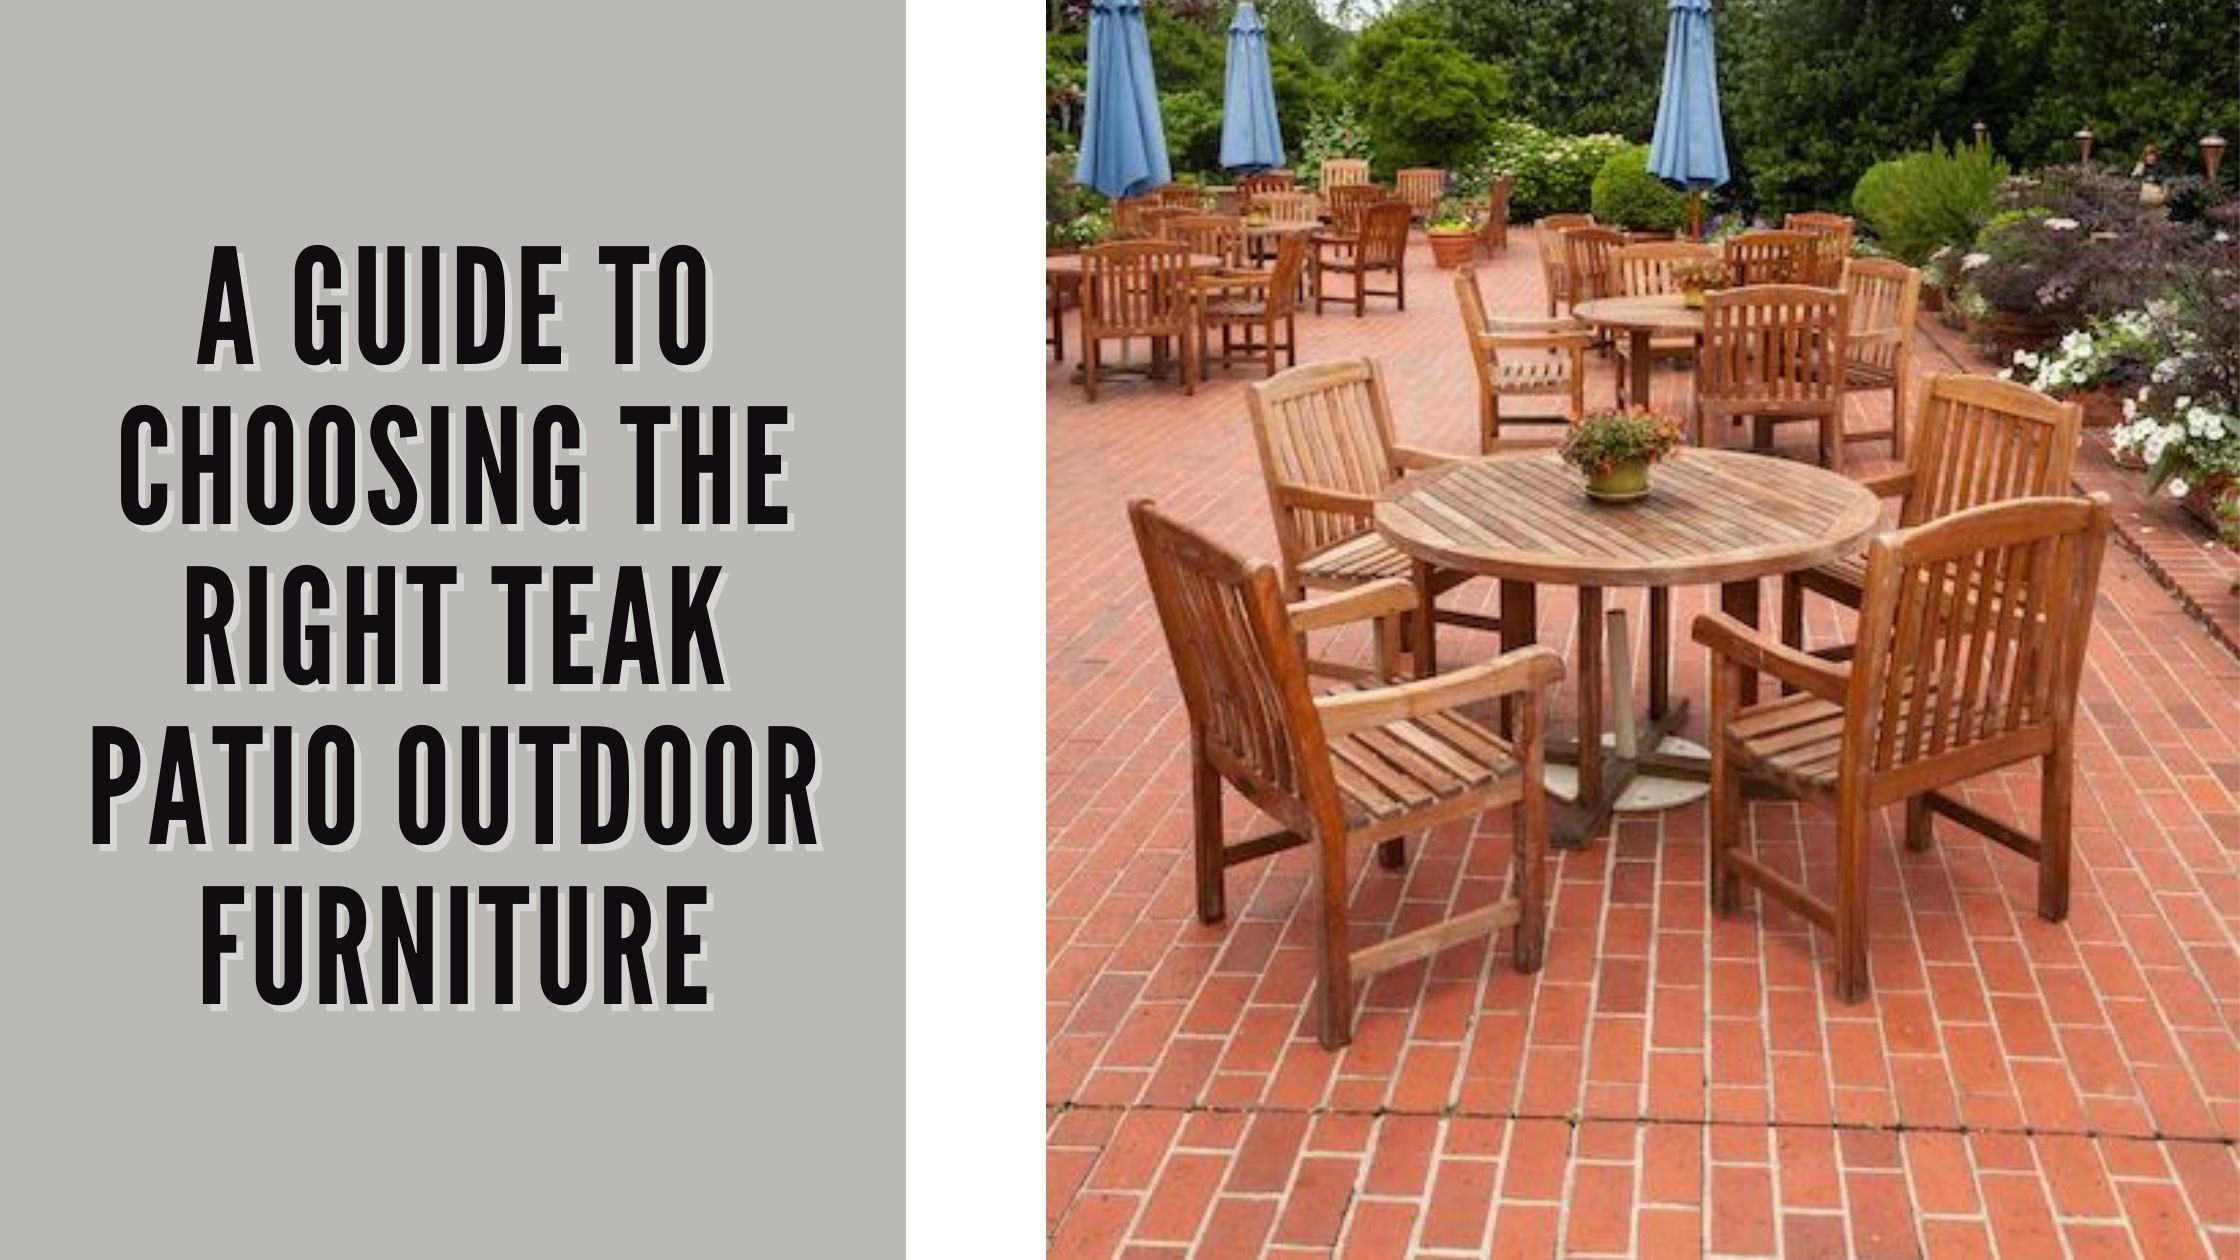 A Guide To Choosing The Right Teak Patio Outdoor Furniture 